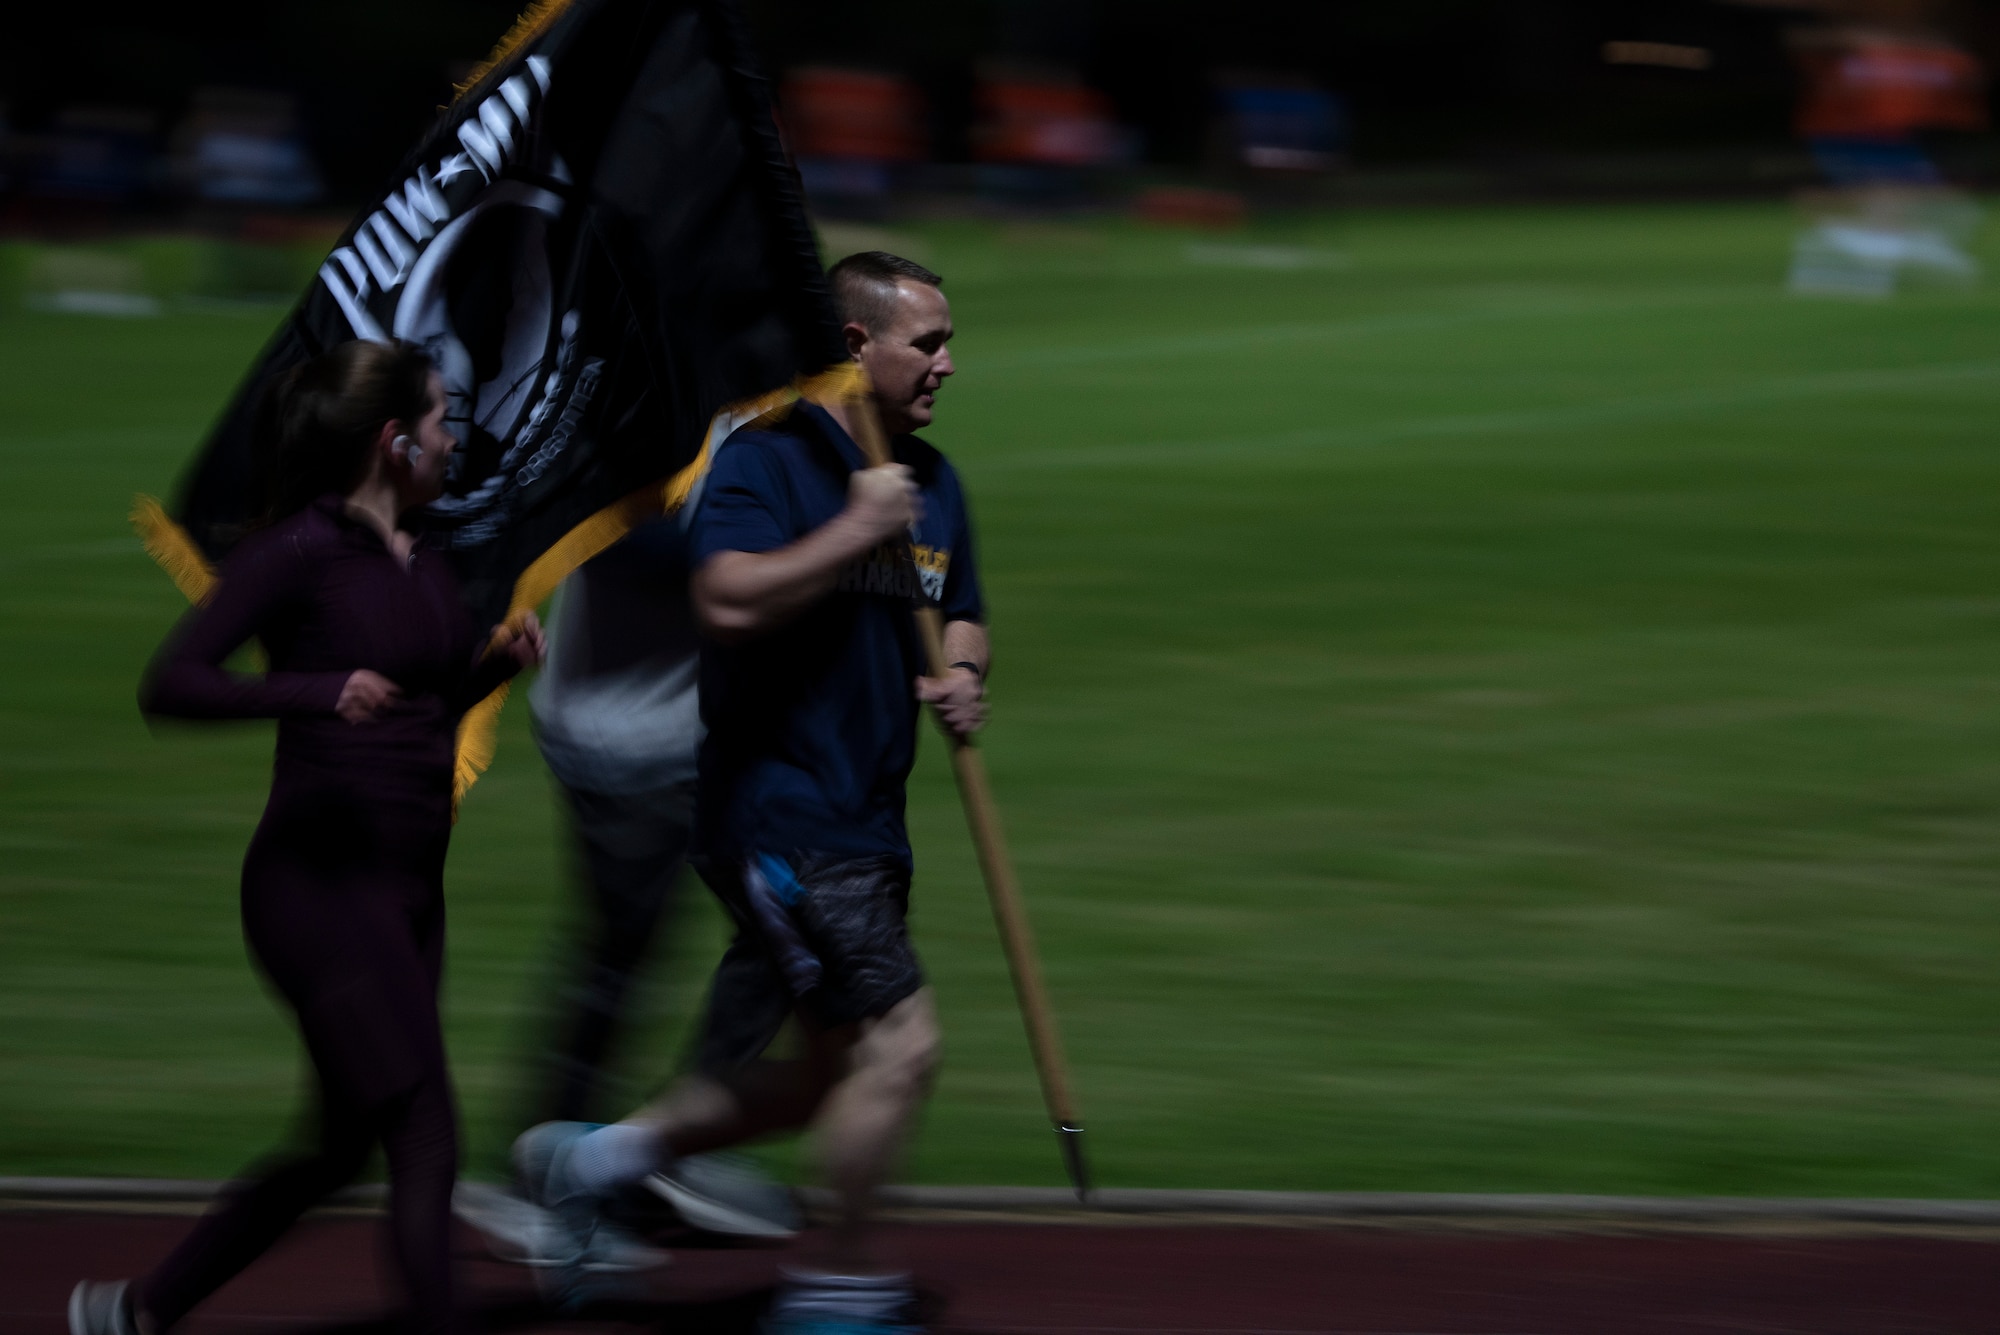 U.S. Air Force Master Sgt. Matthew Plew and Senior Airman Mikayla Whiteley, run with the POW/MIA flag at Royal Air Force Lakenheath, England, Sept. 17, 2020. Members of the 48th Fighter Wing kept the flag in constant motion for 24 hours in honor of more than 82,000 Americans who were Prisoners of War and Missing in Action from past conflicts. (U.S. Air Force photo by Airman 1st Class Jessi Monte)